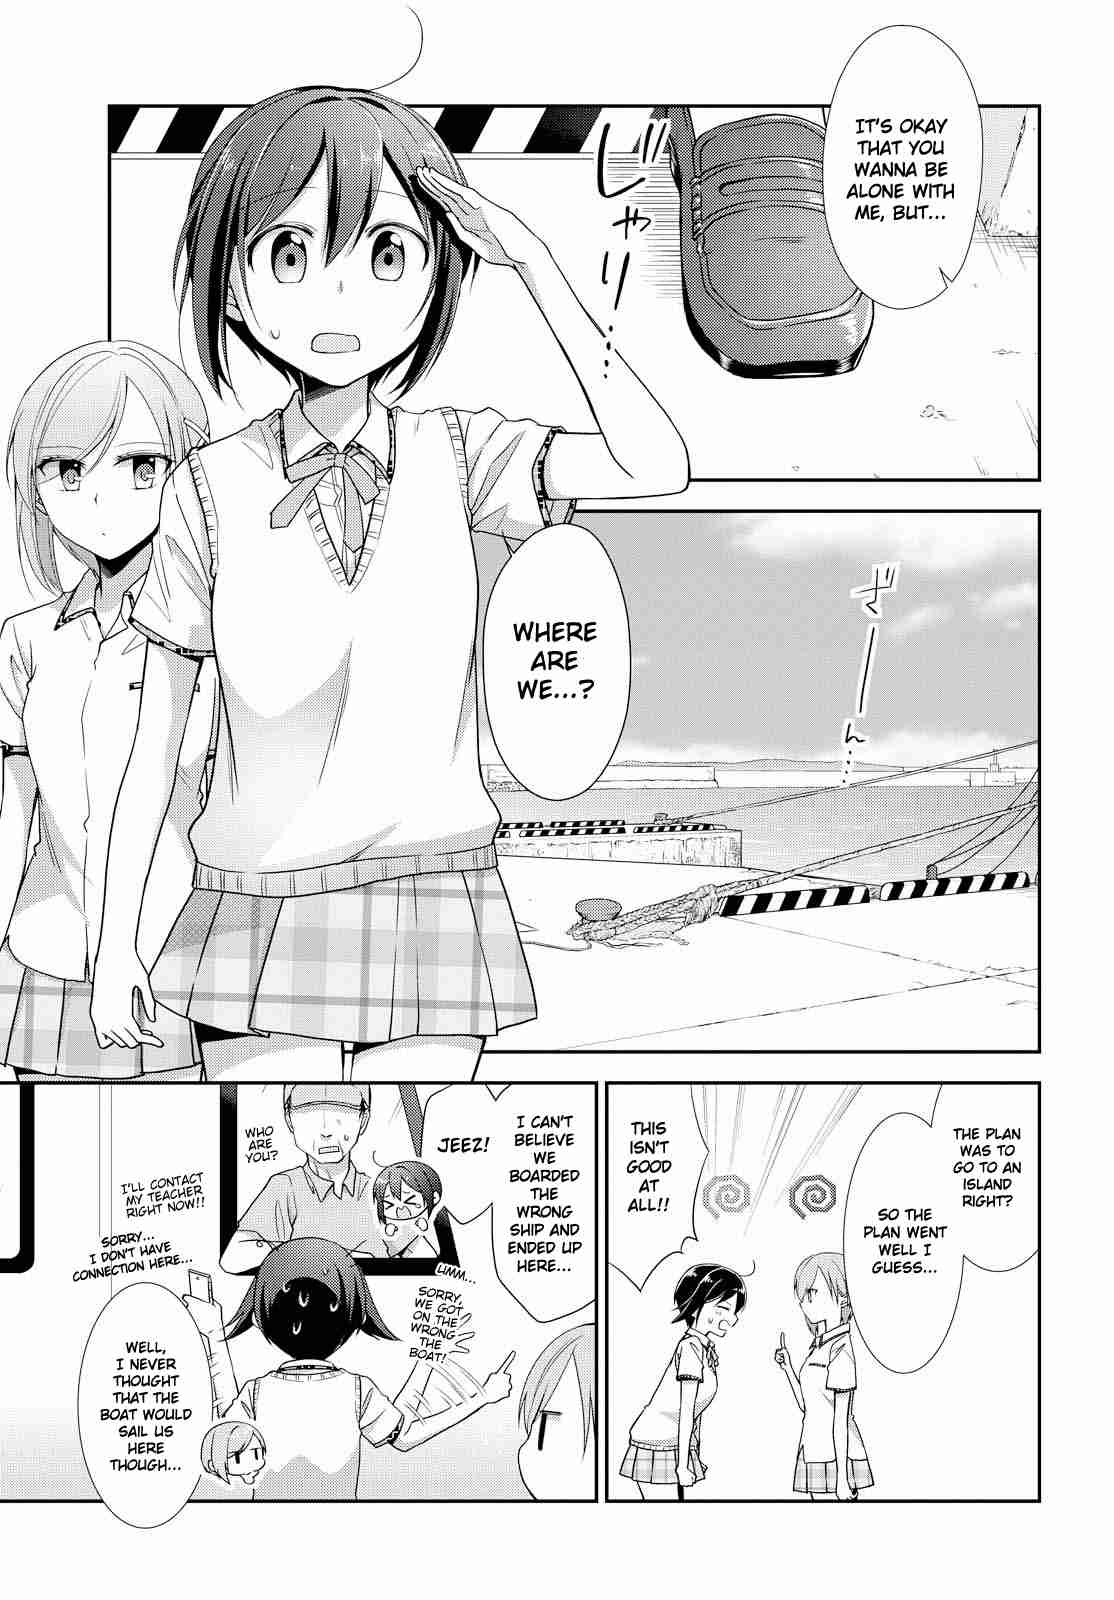 Tachibanakan Triangle Ch. 31 The Heat of This Trip Spells a Special Feeling (Part Two)